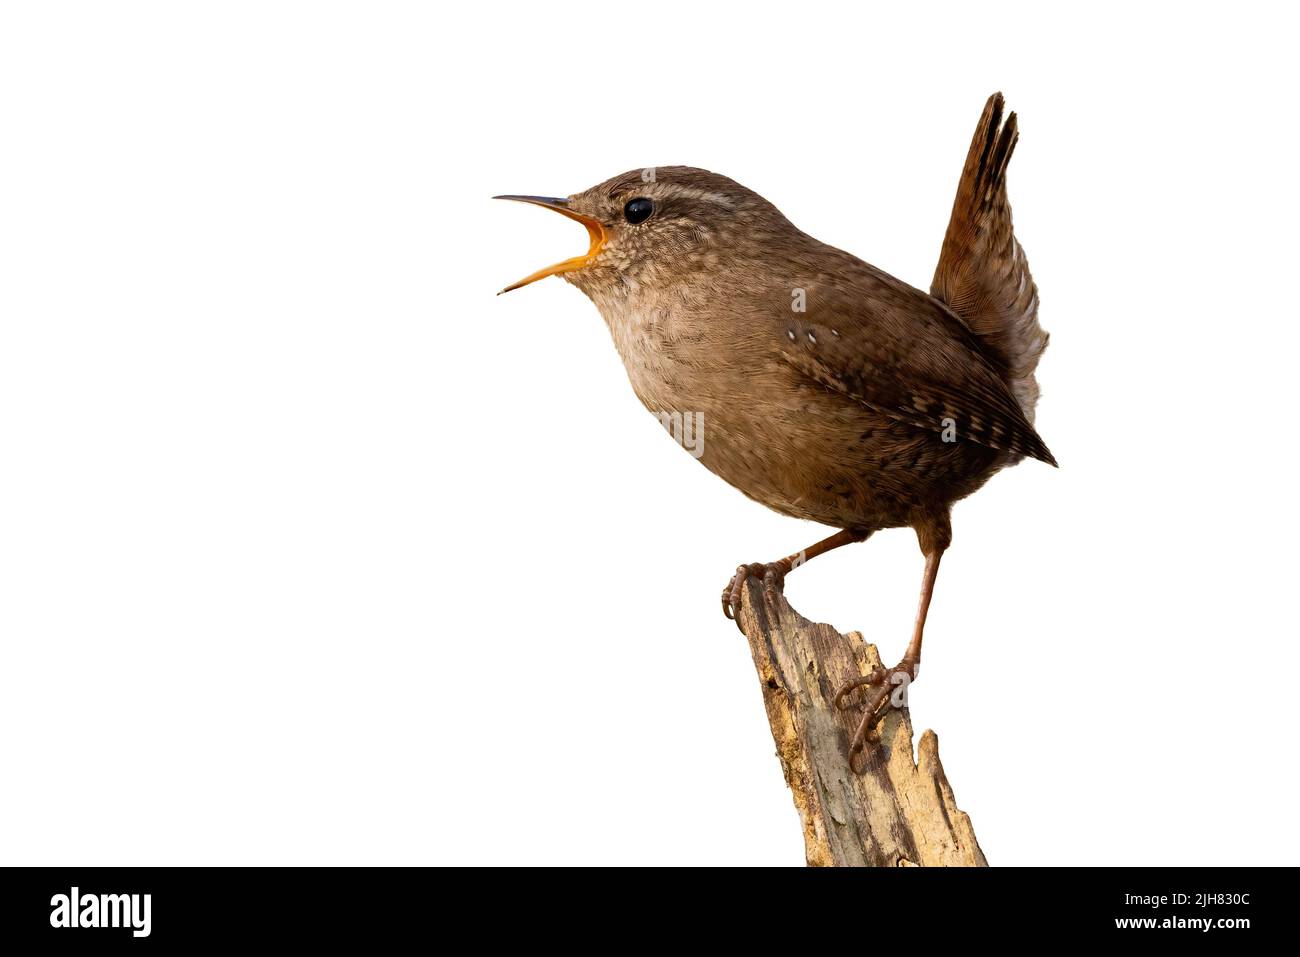 Eurasian wren singing on wood with space for text. Stock Photo